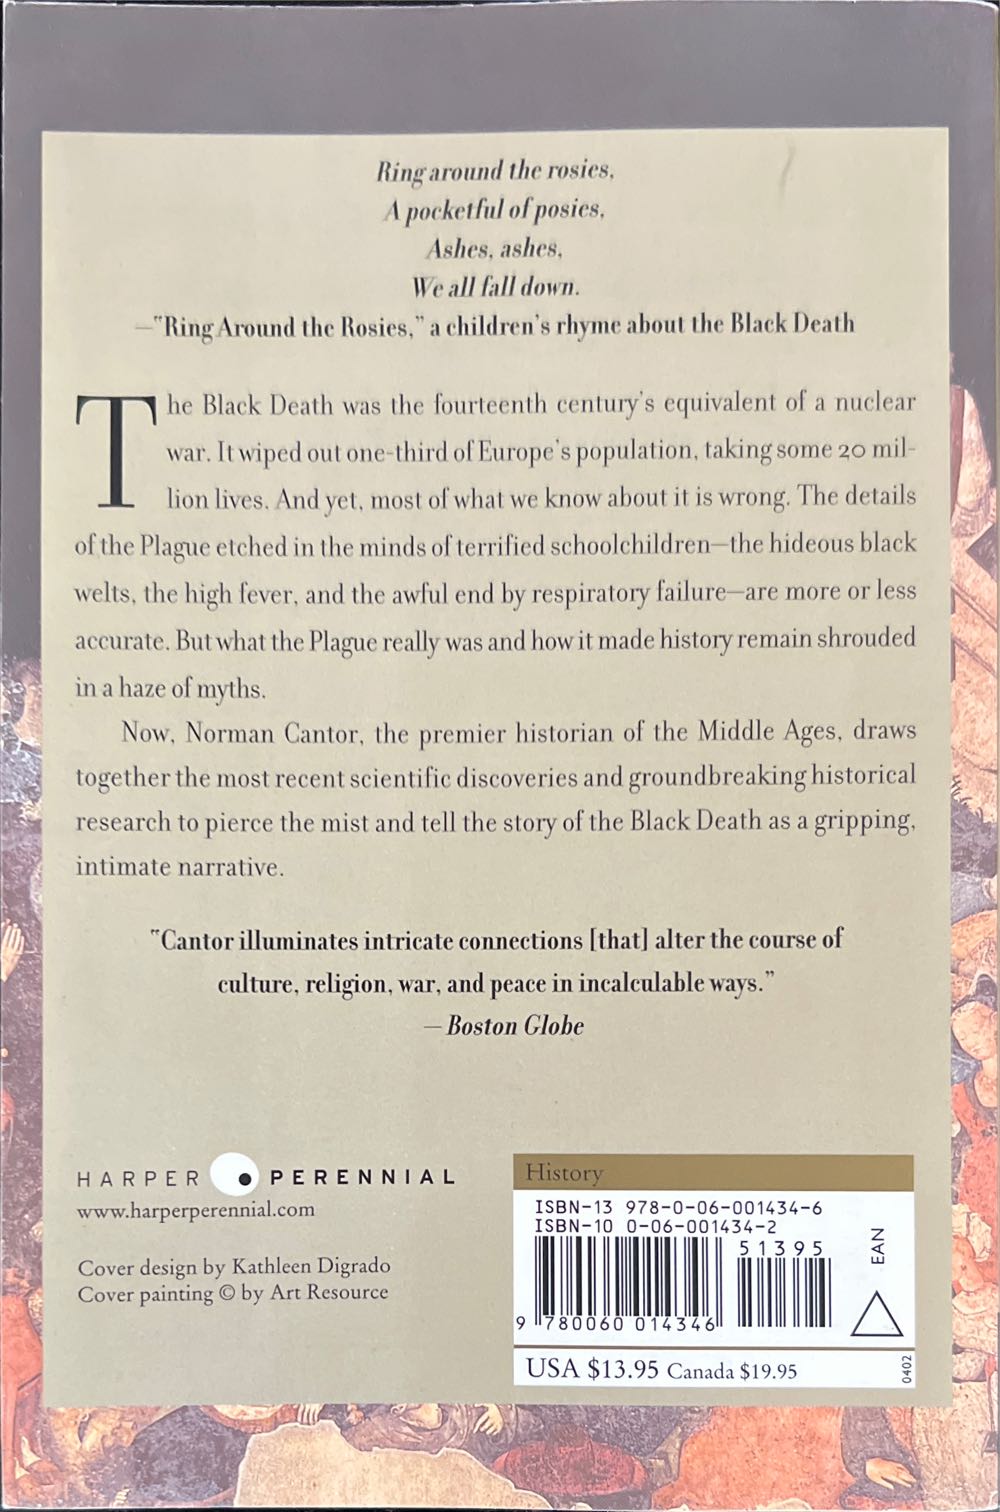 In The Wake Of The Plague - Norman Canter (Harper Perennial - Paperback) book collectible [Barcode 9780060014346] - Main Image 2